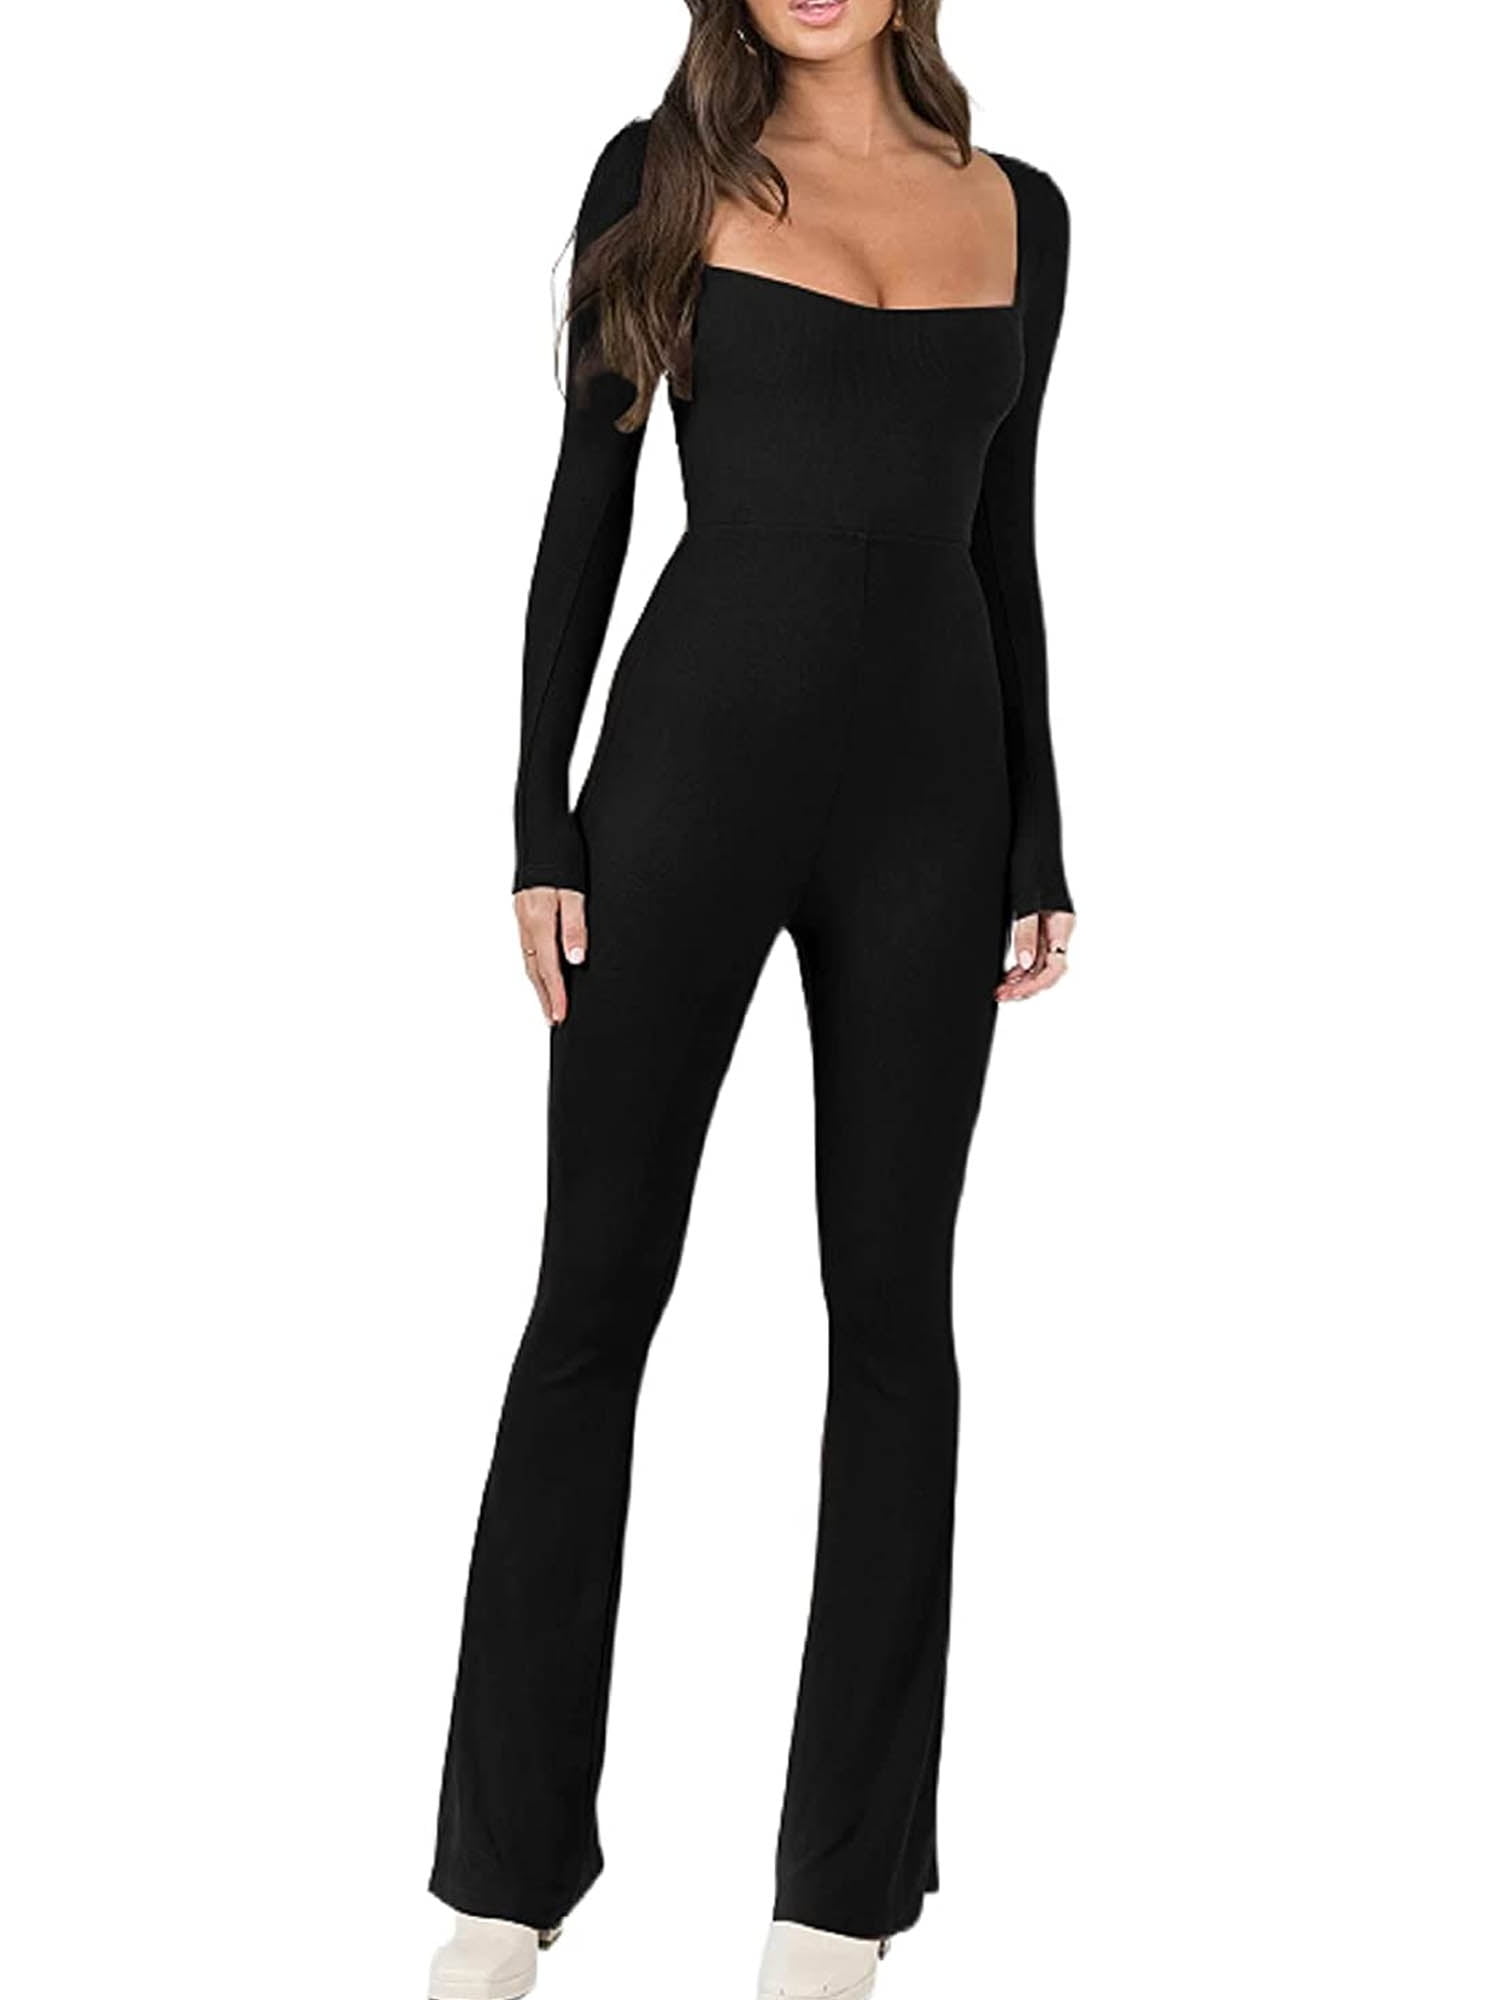 Women Sexy Ribbed Yoga Jumpsuit Long Sleeve Square Neck Bodycon Flared ...